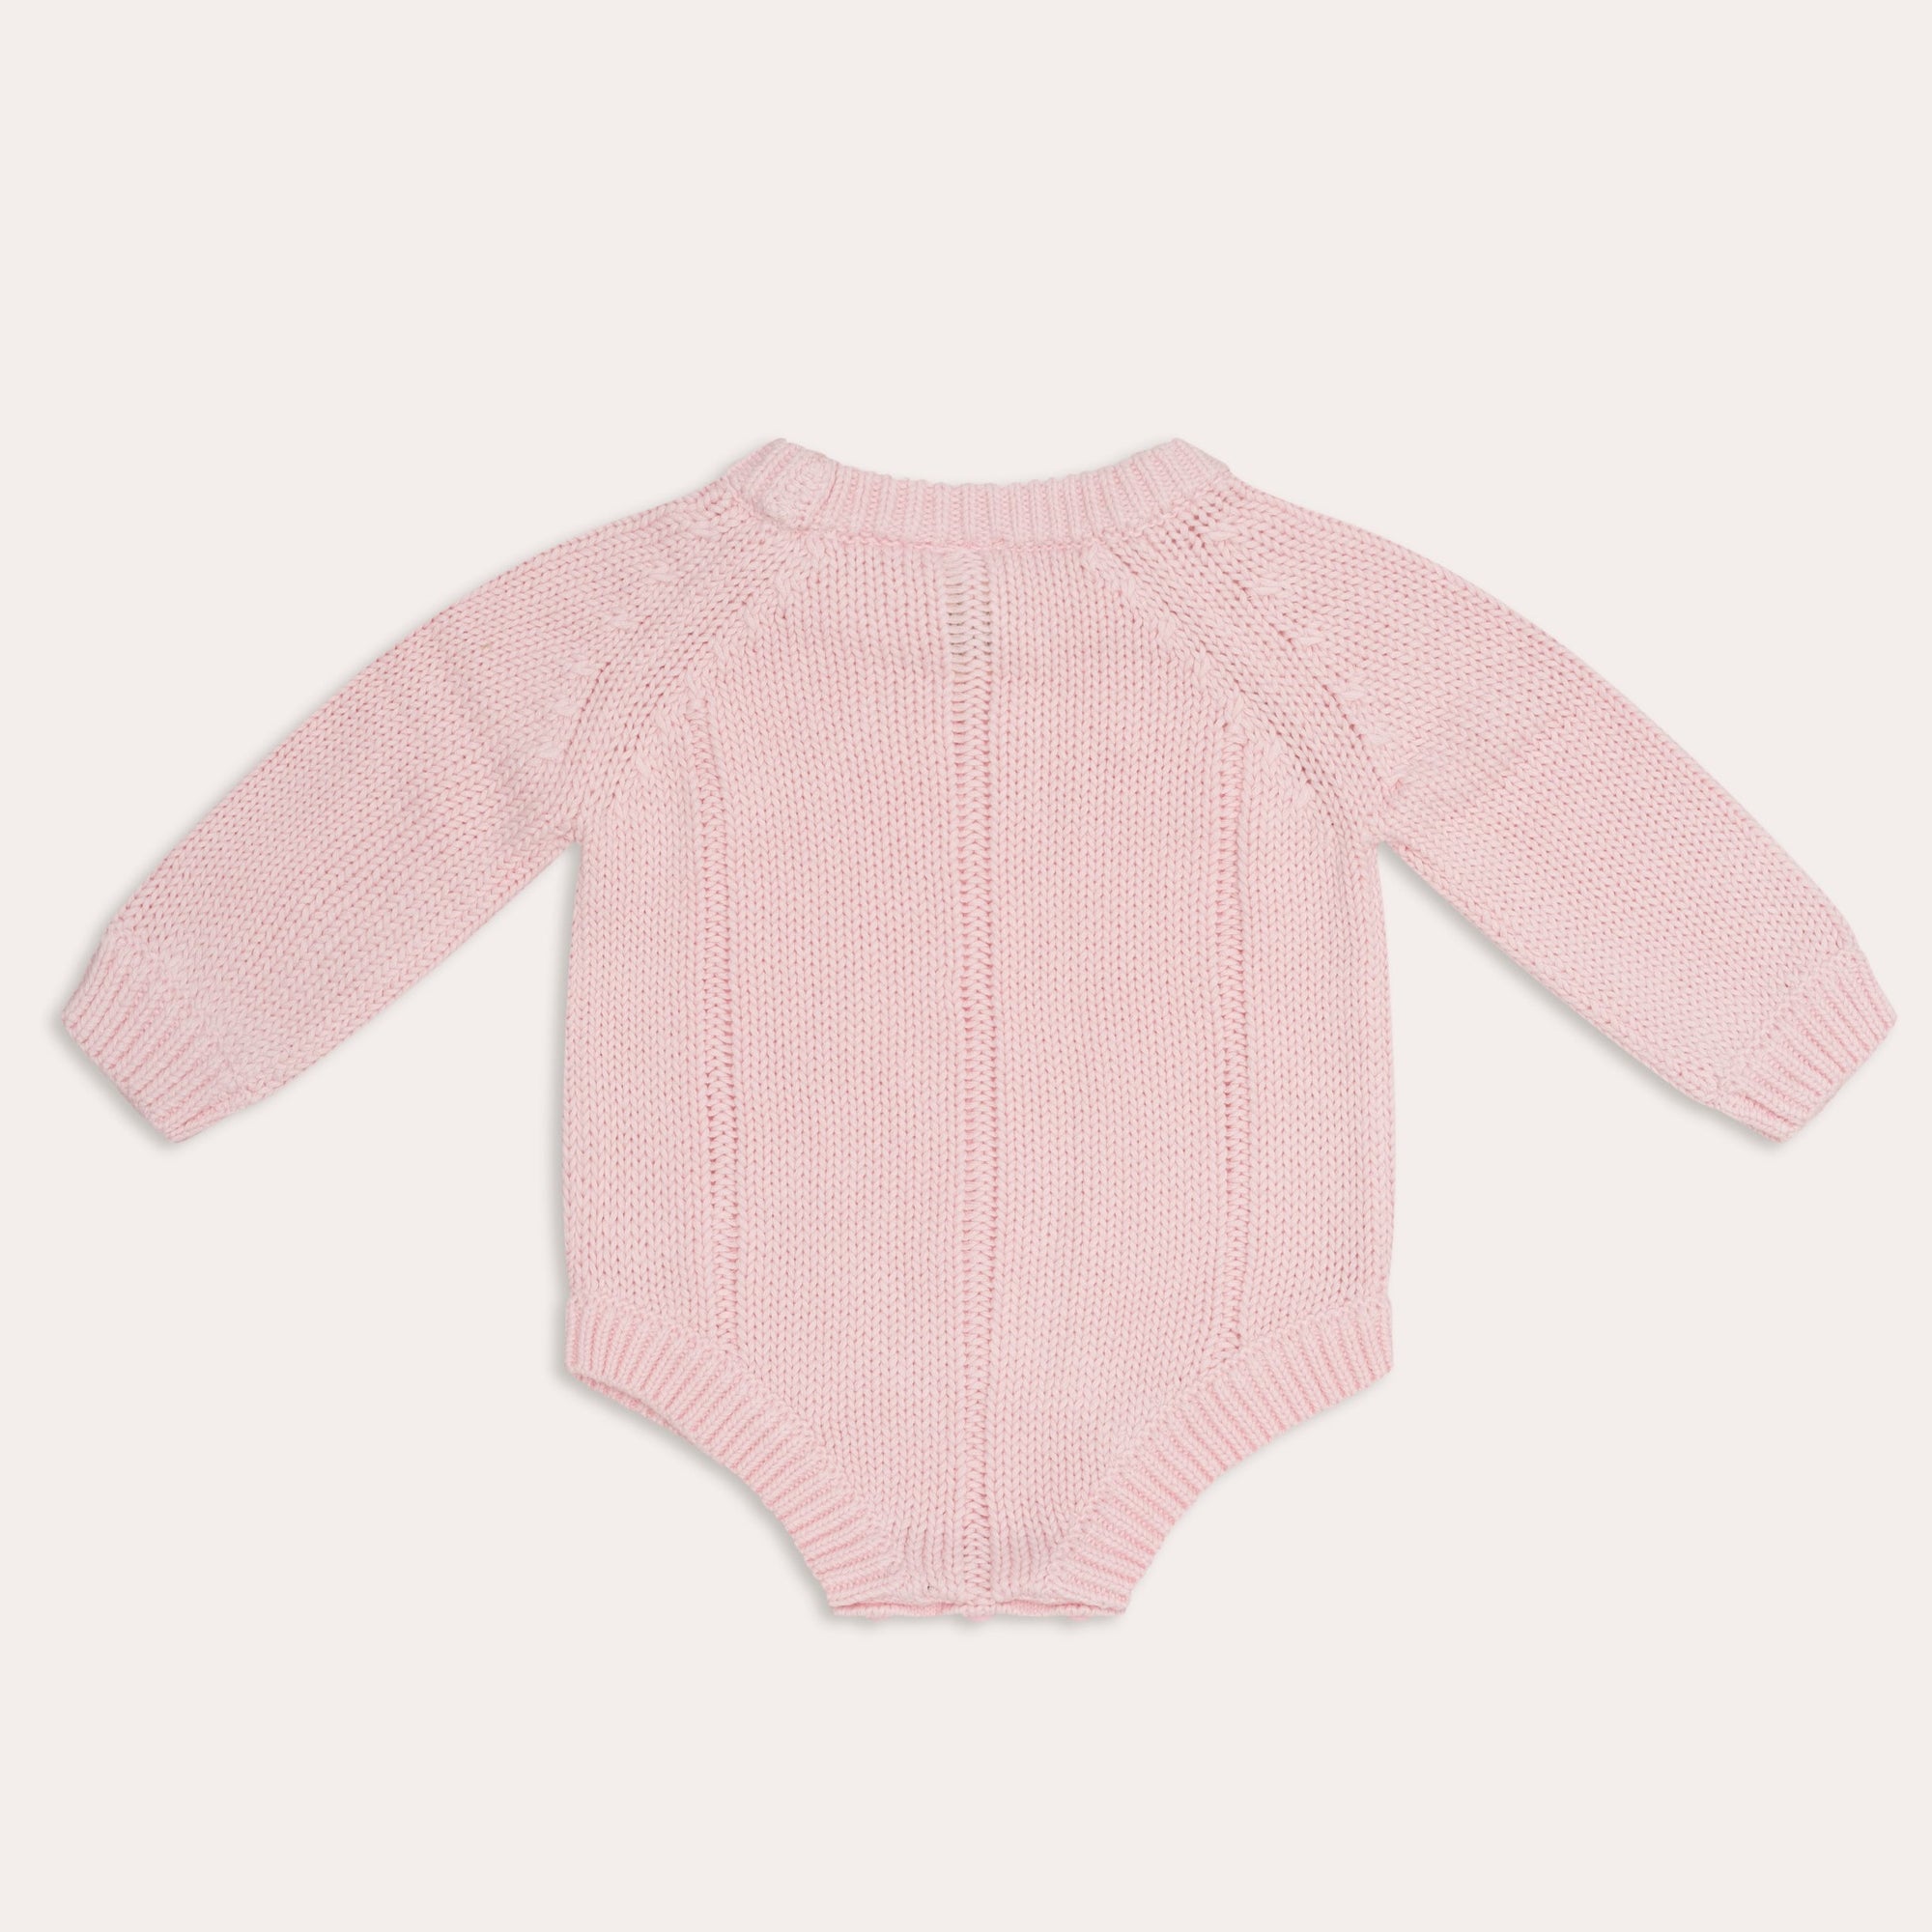 An illoura tallow knit romper in pink by Illoura the Label with ribbed finishings on a white background.